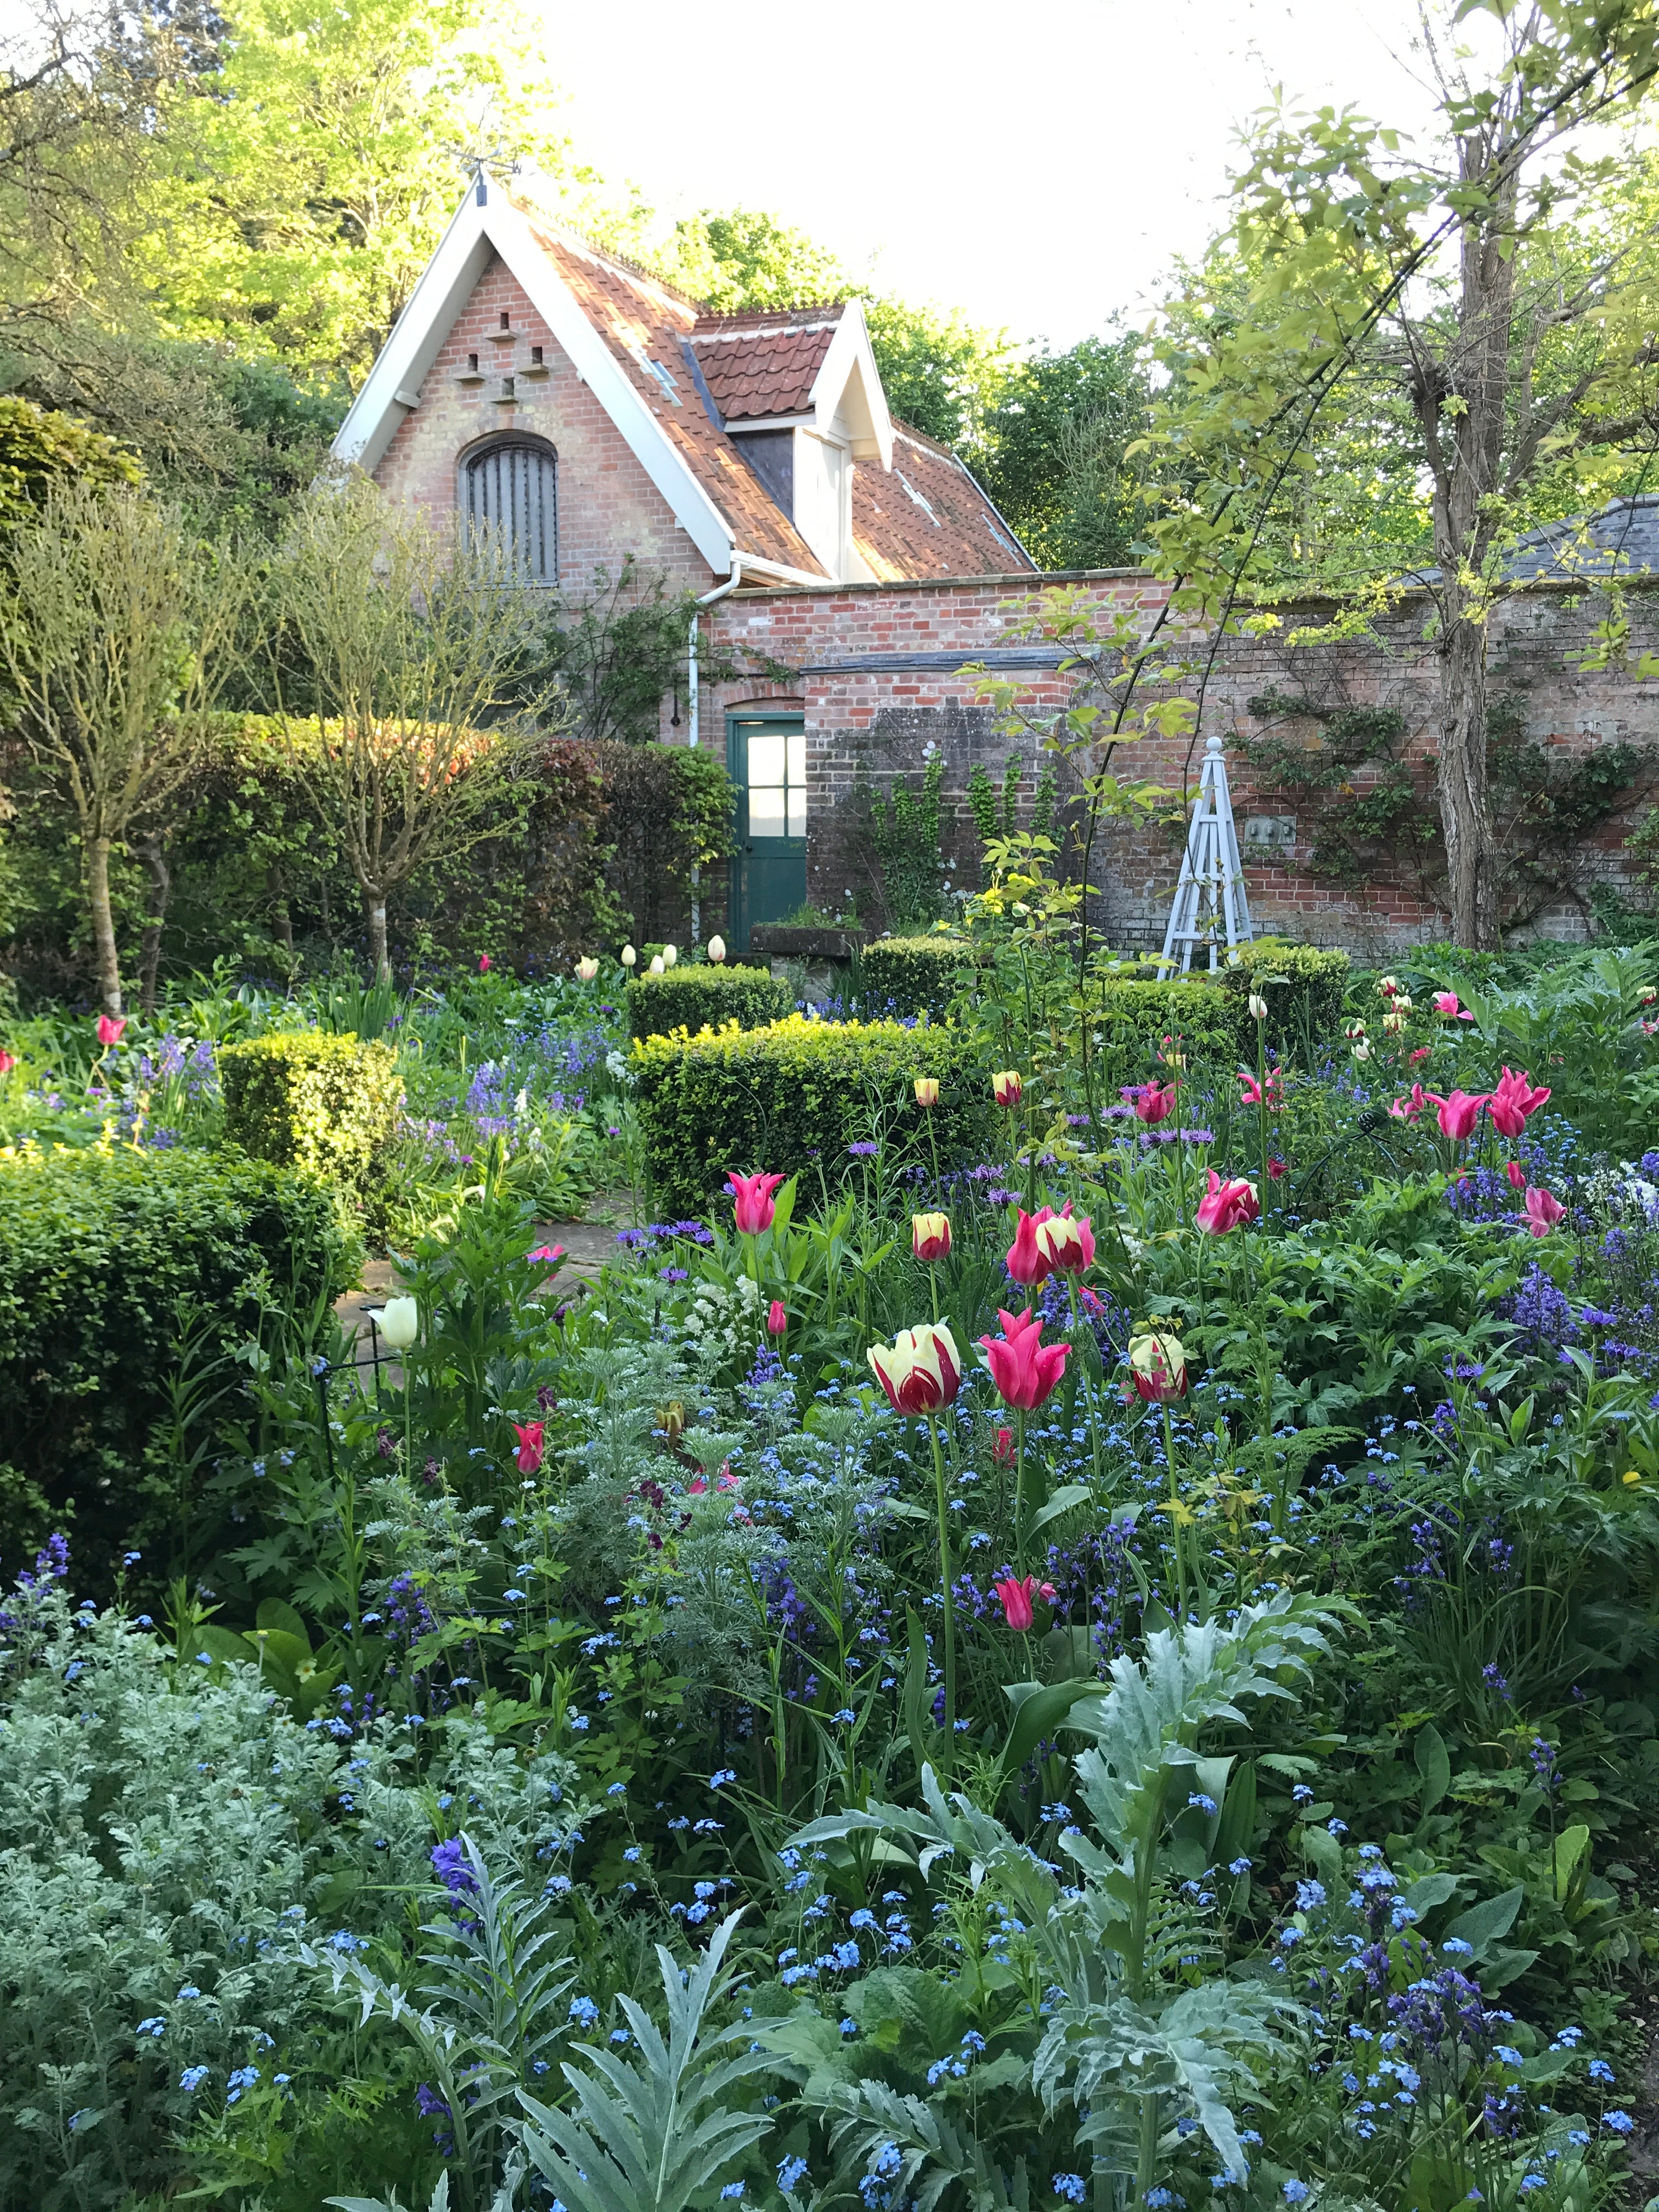 Laing documents the restoration of their garden in new book ‘The Garden Against Time’